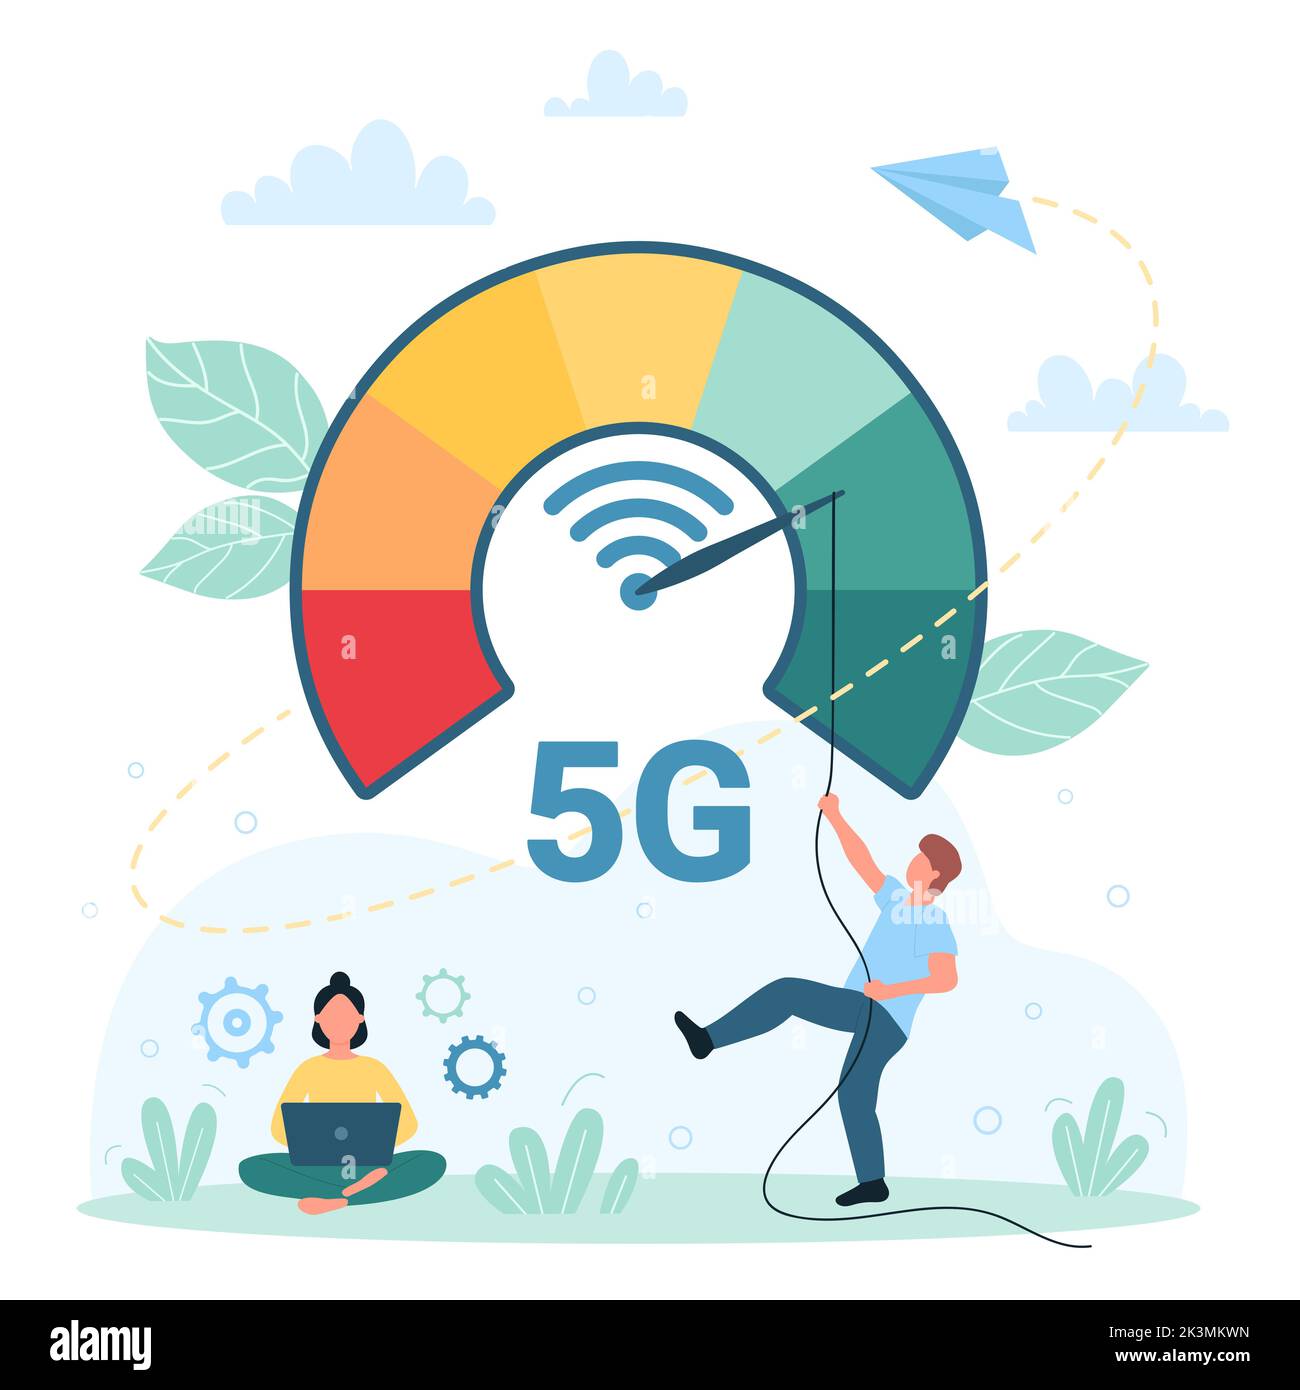 5G network, broadband internet connection speed increase vector illustration. Cartoon tiny man pushing arrow on speed meter to reduce latency of broadcast signal and wifi waves, woman using laptop Stock Vector